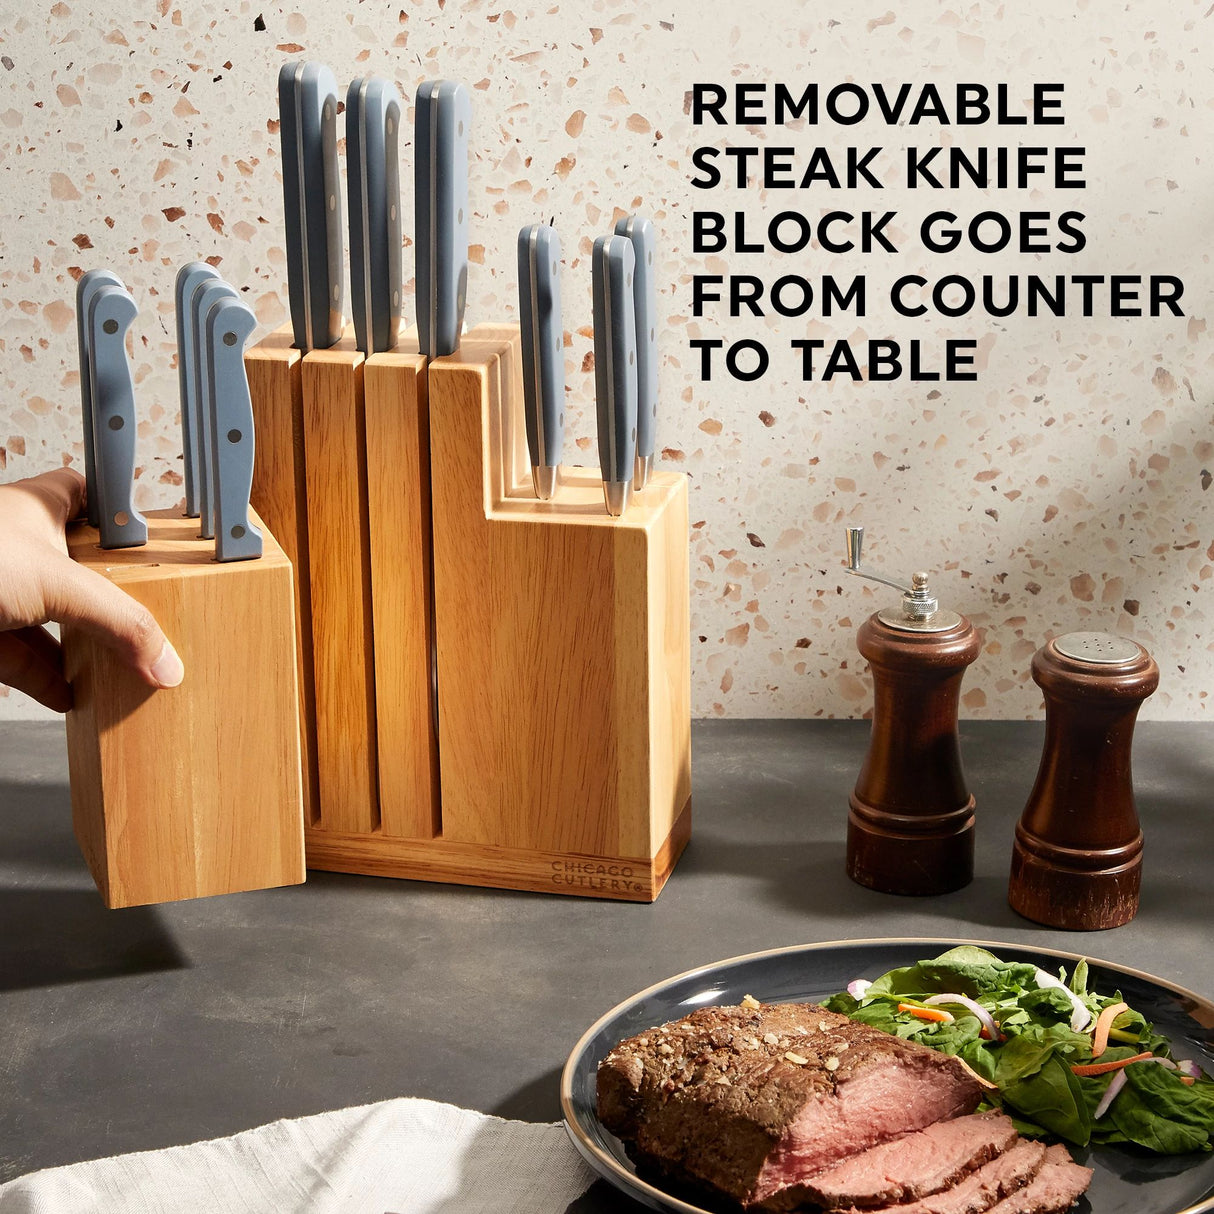  Halsted 14-piece Modular Block Set with text removable steak knife block goes from counter to table